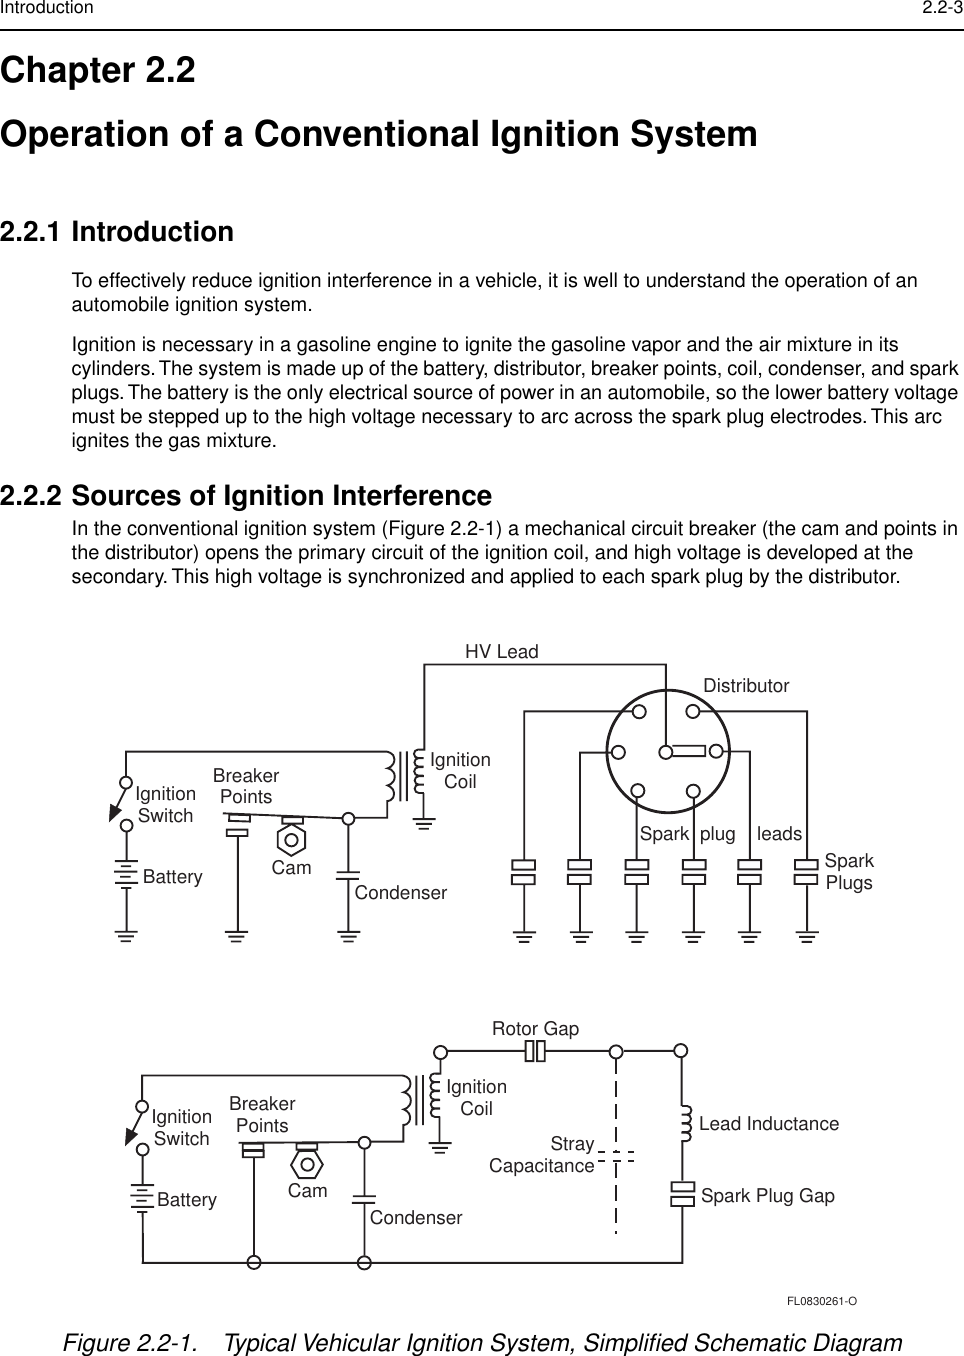  Introduction 2.2-3 Chapter 2.2Operation of a Conventional Ignition System 2.2.1 Introduction To effectively reduce ignition interference in a vehicle, it is well to understand the operation of an automobile ignition system.Ignition is necessary in a gasoline engine to ignite the gasoline vapor and the air mixture in its cylinders. The system is made up of the battery, distributor, breaker points, coil, condenser, and spark plugs. The battery is the only electrical source of power in an automobile, so the lower battery voltage must be stepped up to the high voltage necessary to arc across the spark plug electrodes. This arc ignites the gas mixture. 2.2.2 Sources of Ignition Interference  In the conventional ignition system (Figure 2.2-1) a mechanical circuit breaker (the cam and points in the distributor) opens the primary circuit of the ignition coil, and high voltage is developed at the secondary. This high voltage is synchronized and applied to each spark plug by the distributor. Figure 2.2-1. Typical Vehicular Ignition System, Simpliﬁed Schematic Diagram HV LeadDistributorSpark  plug    leadsSparkPlugsIgnitionCoilCondenserCamBreakerPointsIgnitionSwitchBatteryIgnitionCoilCondenserStrayCapacitanceCamBreakerPointsIgnitionSwitchBatteryRotor GapLead InductanceSpark Plug GapFL0830261-O